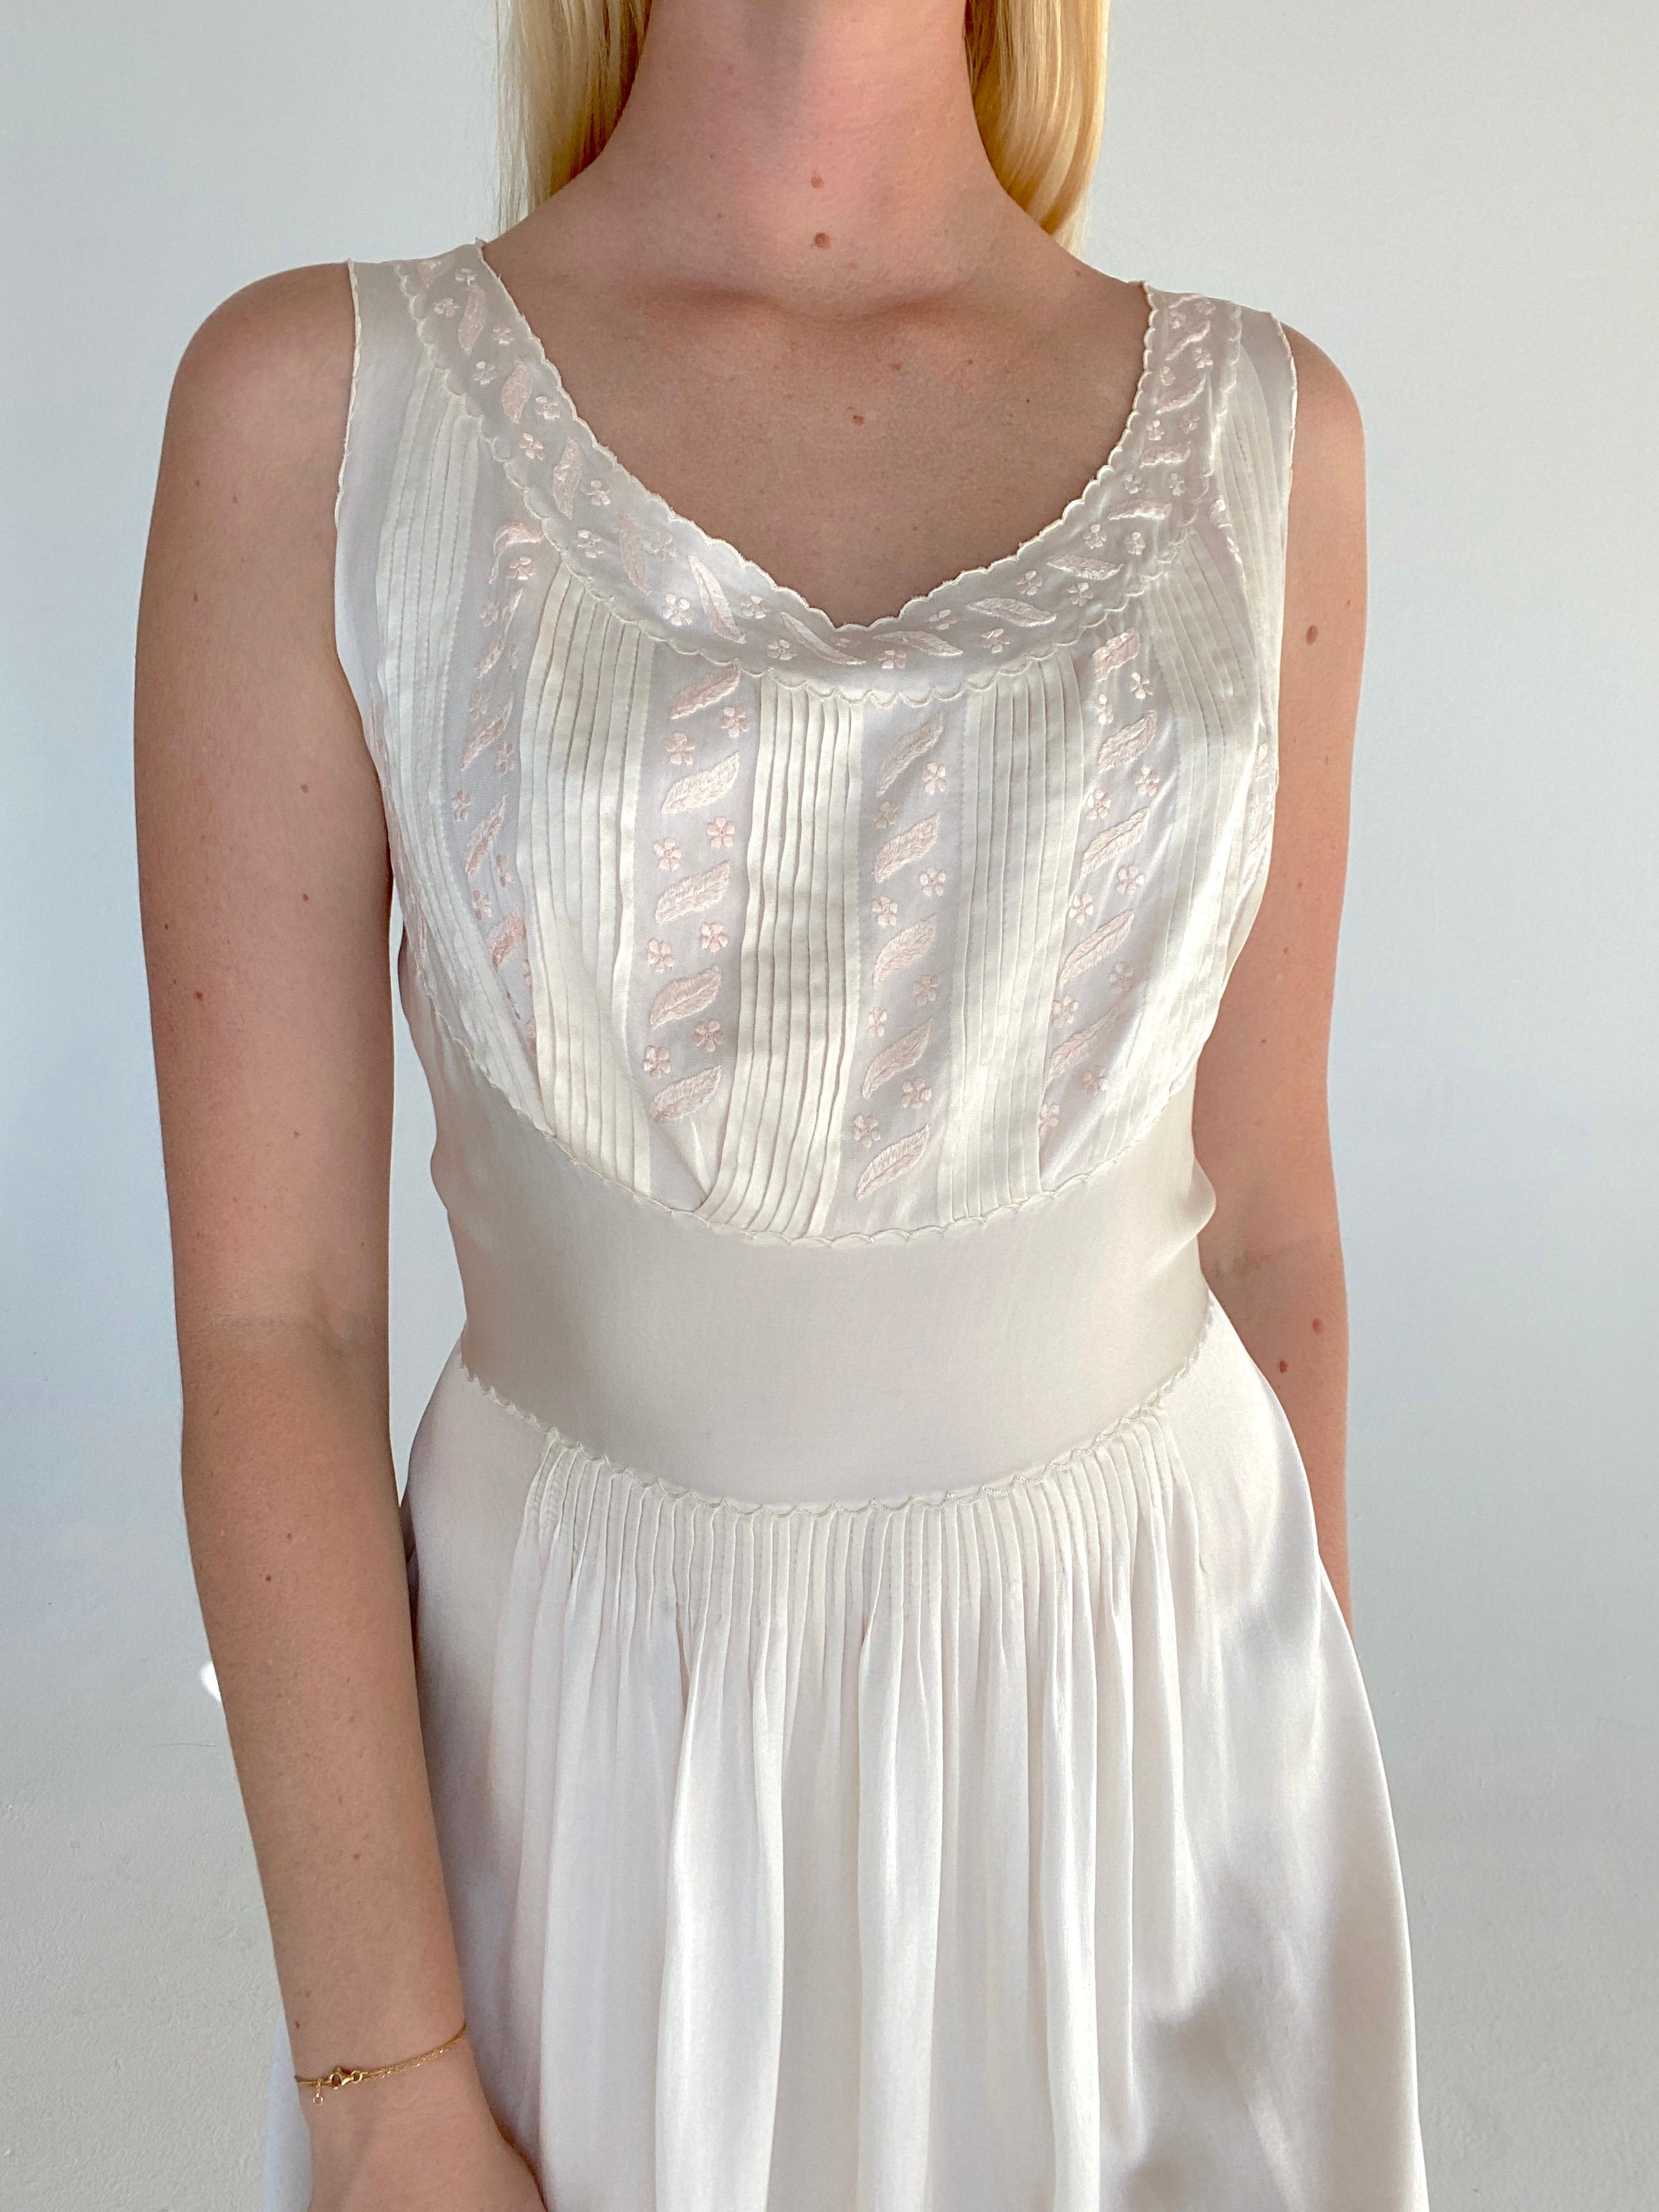 1930's Off White Silk Dress with Pale Pink Embroidery